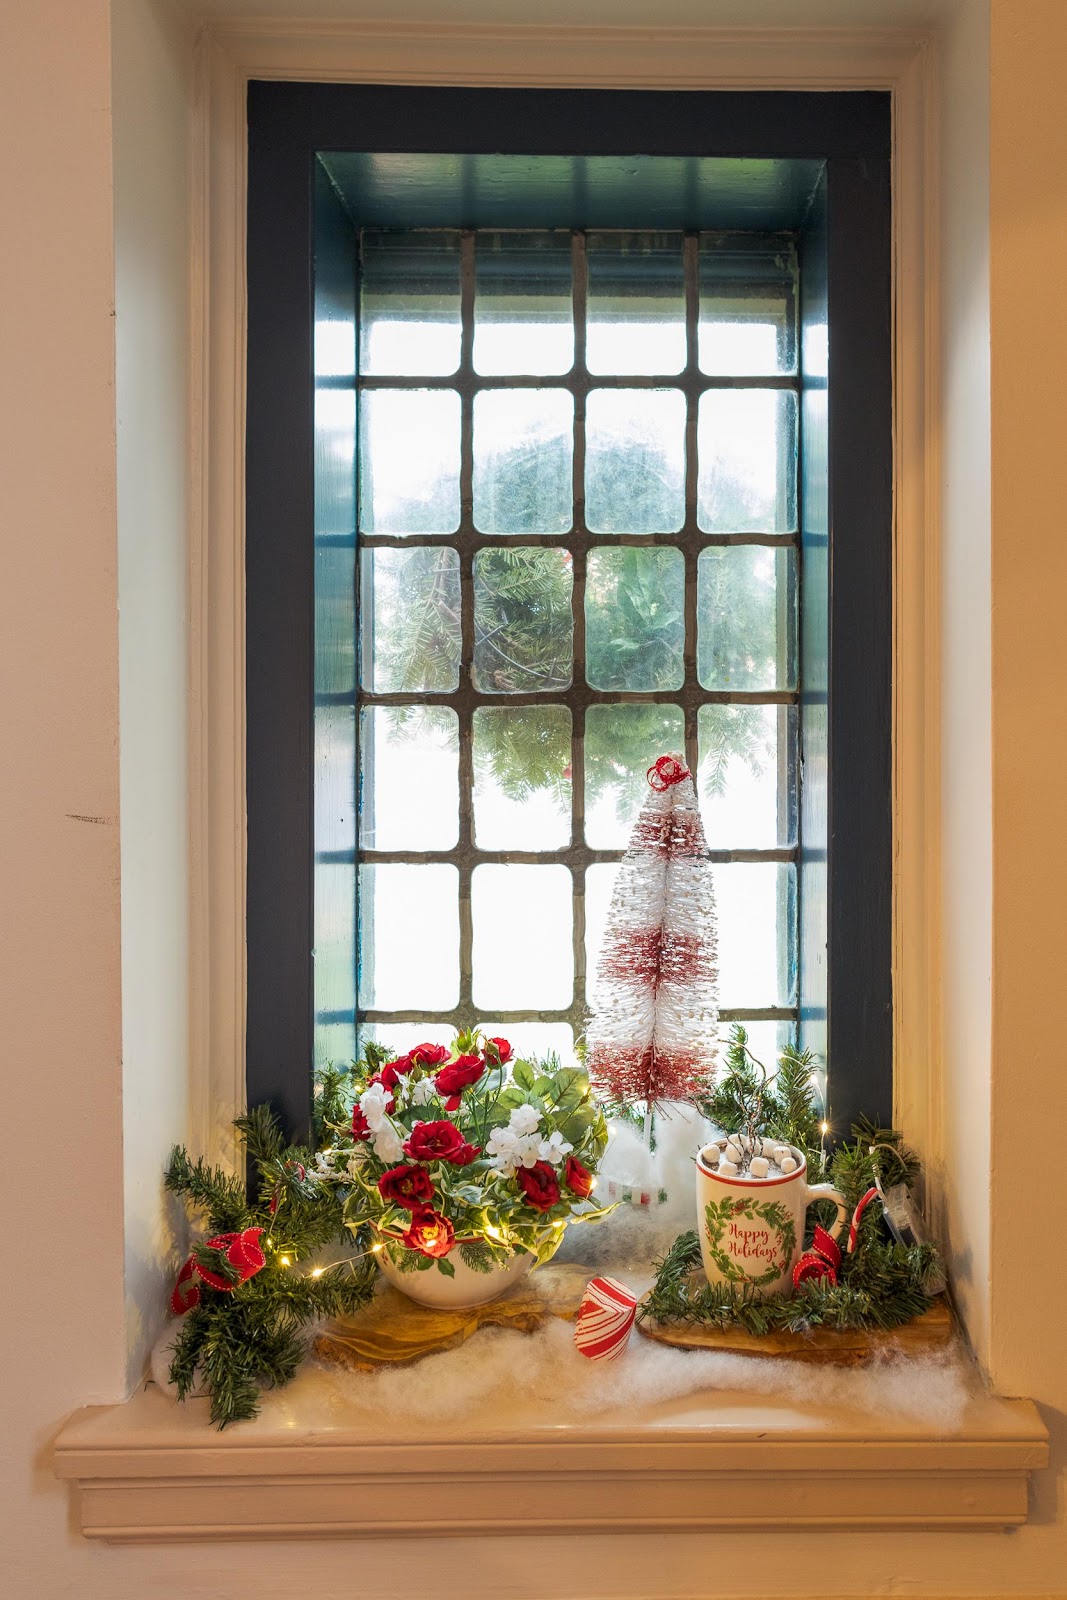 This recent holiday season, the Sussex Gardeners designed festive arrangements with live plants to decorate the Zwaanendael Museum.